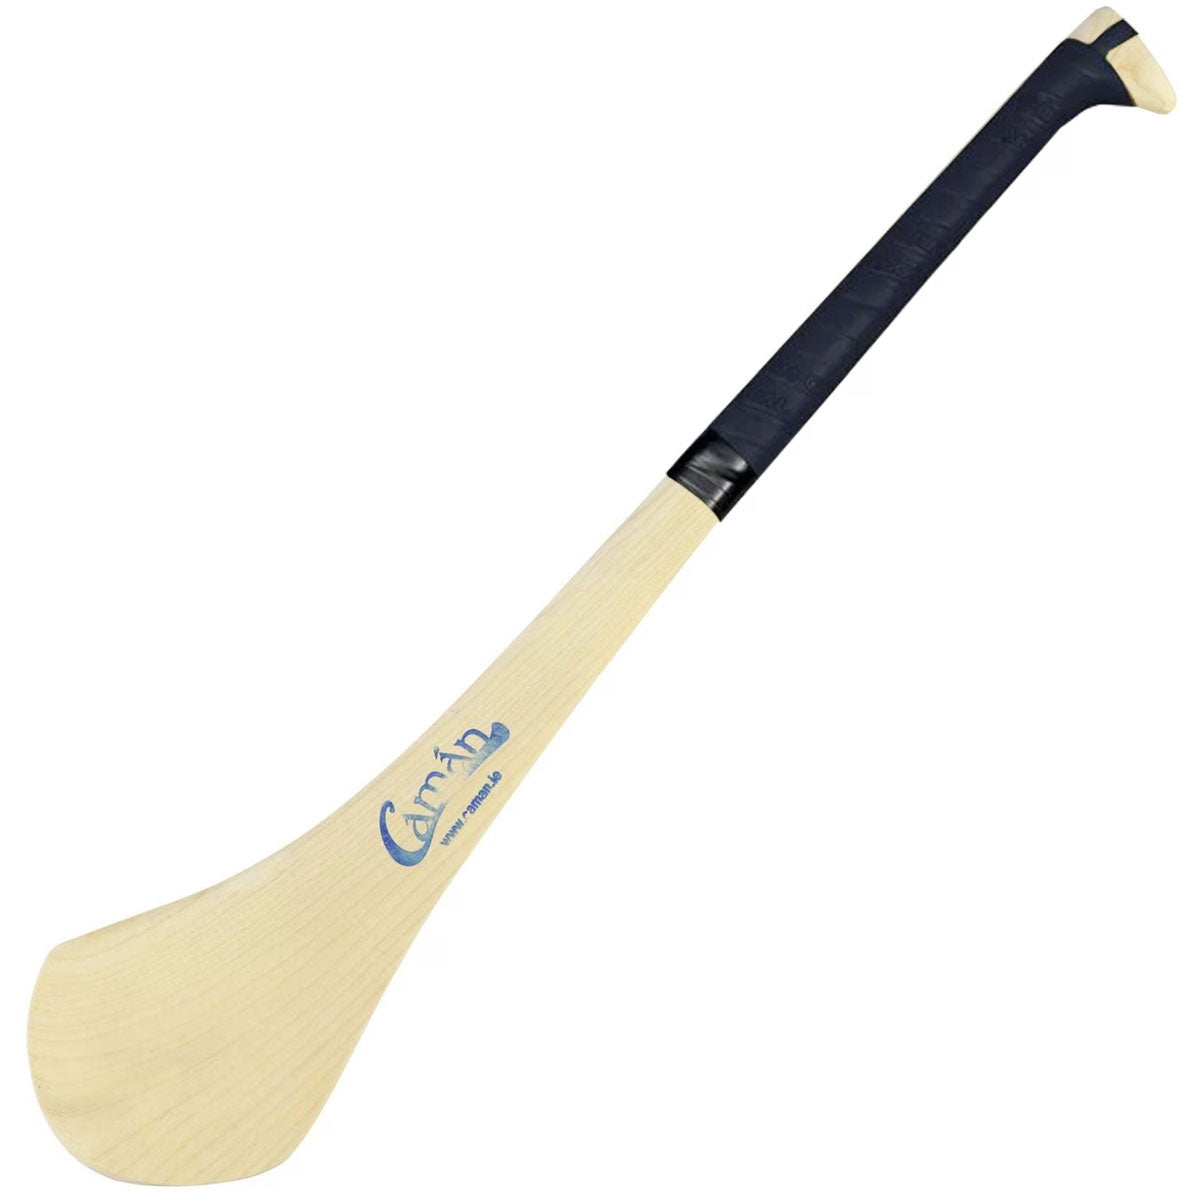 Caman Hurling Stick size 30 (Inches)